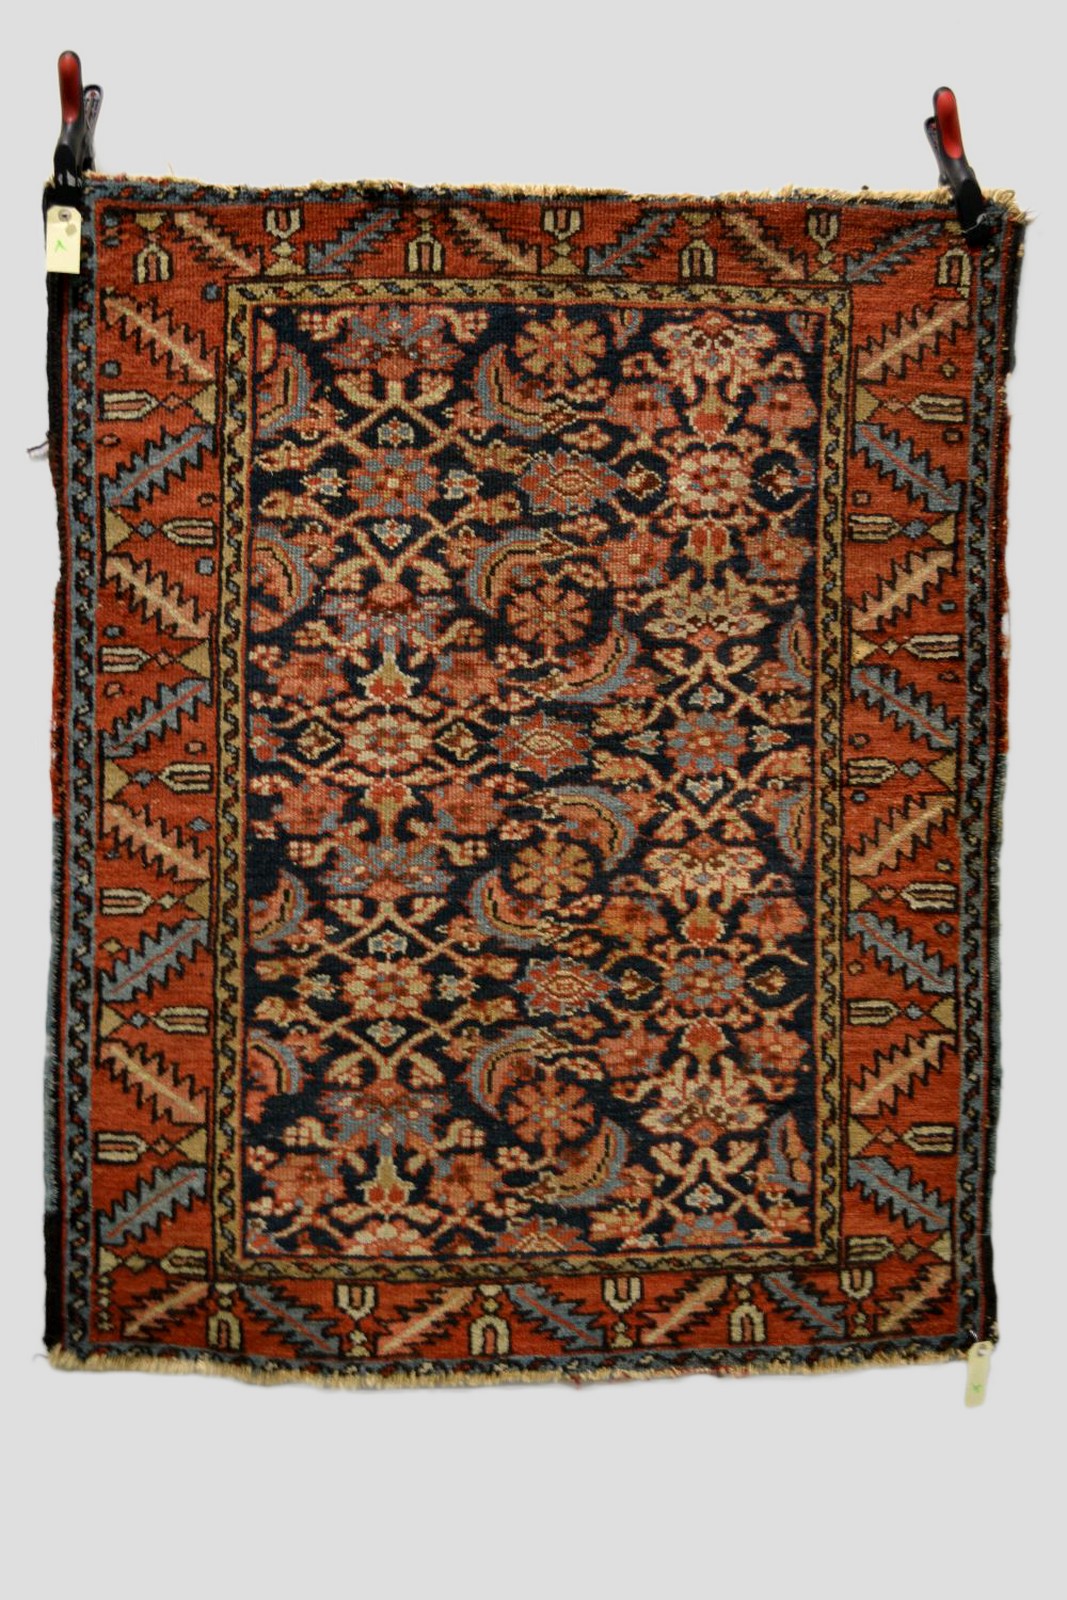 Heriz rug, north west Persia, circa 1920s, 4ft. 2in. x 3ft. 5in. 1.27m. x 1.04m. Overall wear;